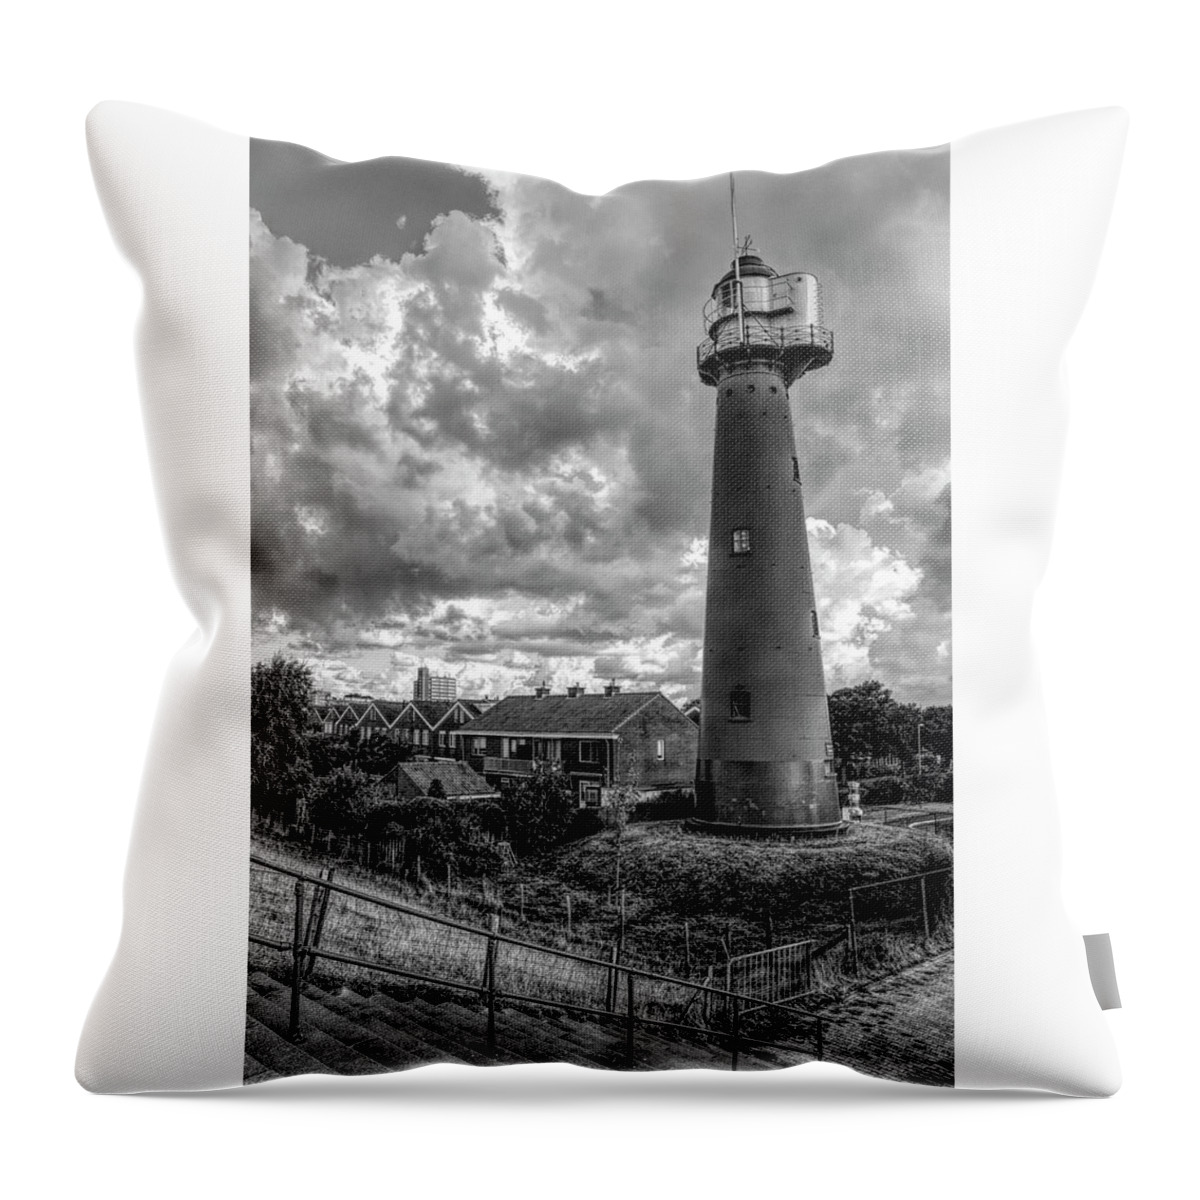 Barns Throw Pillow featuring the photograph Tall Lighthouse in Holland Black and White by Debra and Dave Vanderlaan